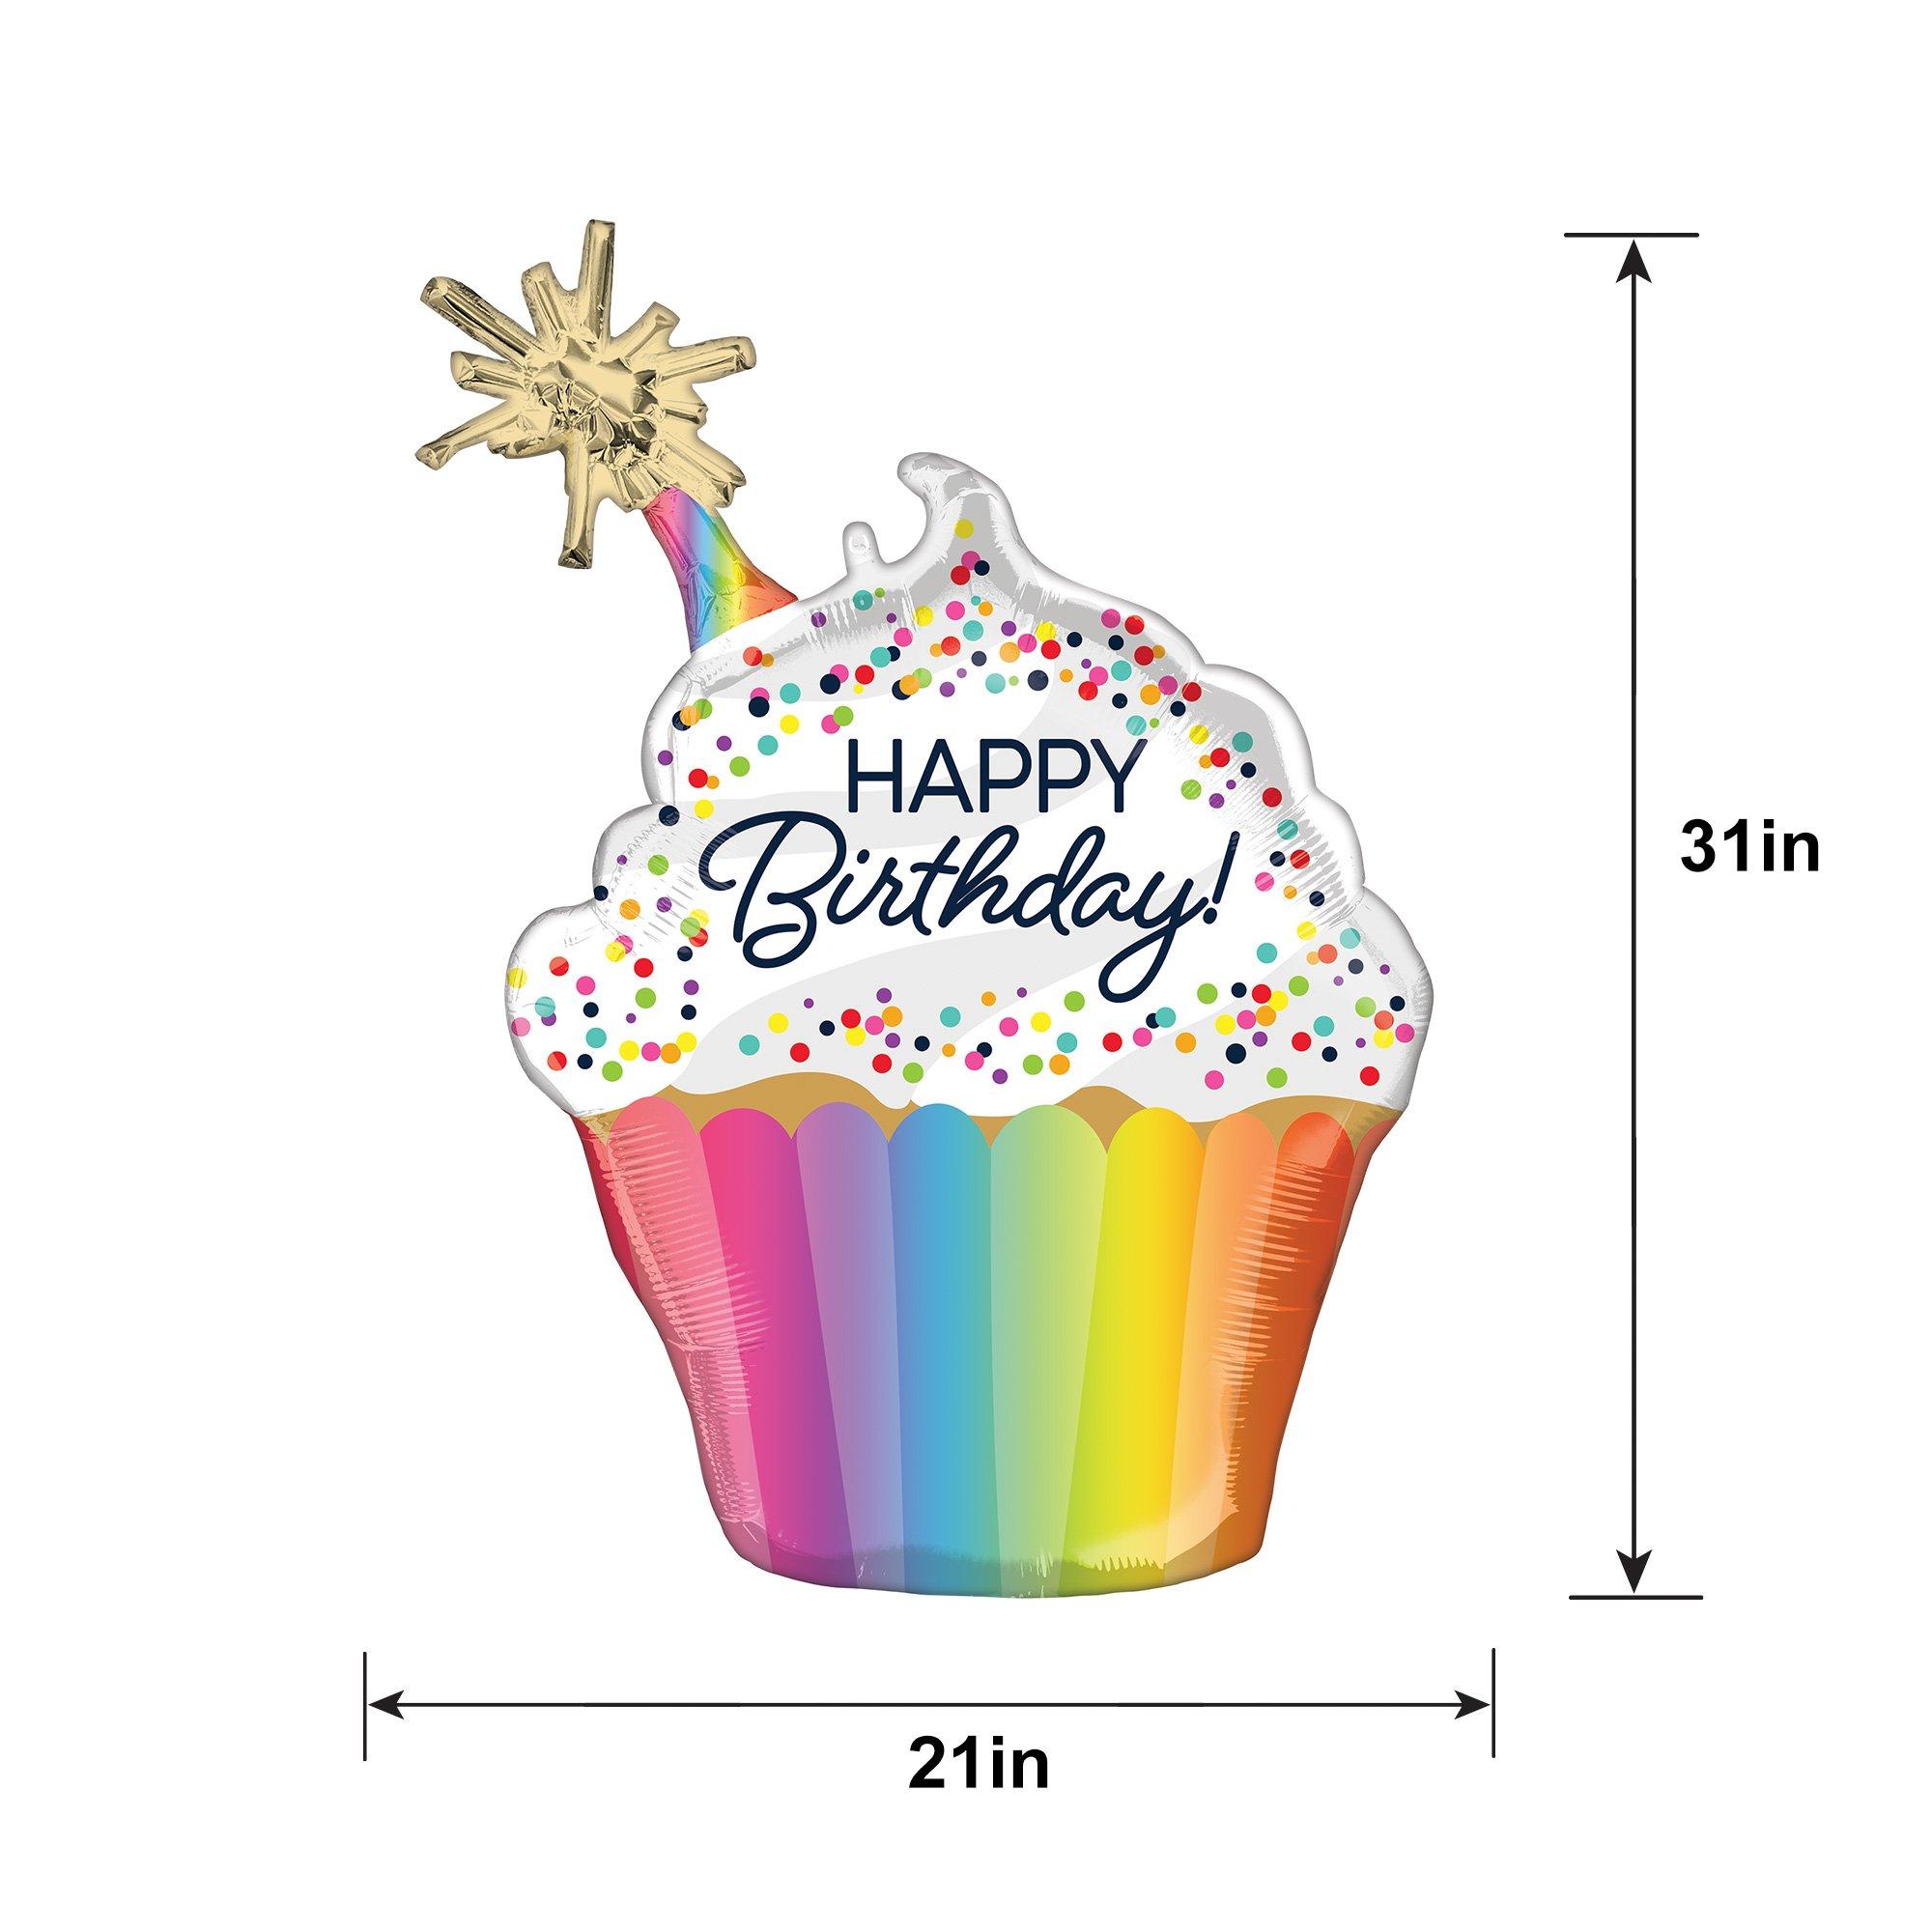 Confetti Sprinkle Happy Birthday Cupcake-Shaped Foil Balloon, 21in x 31in